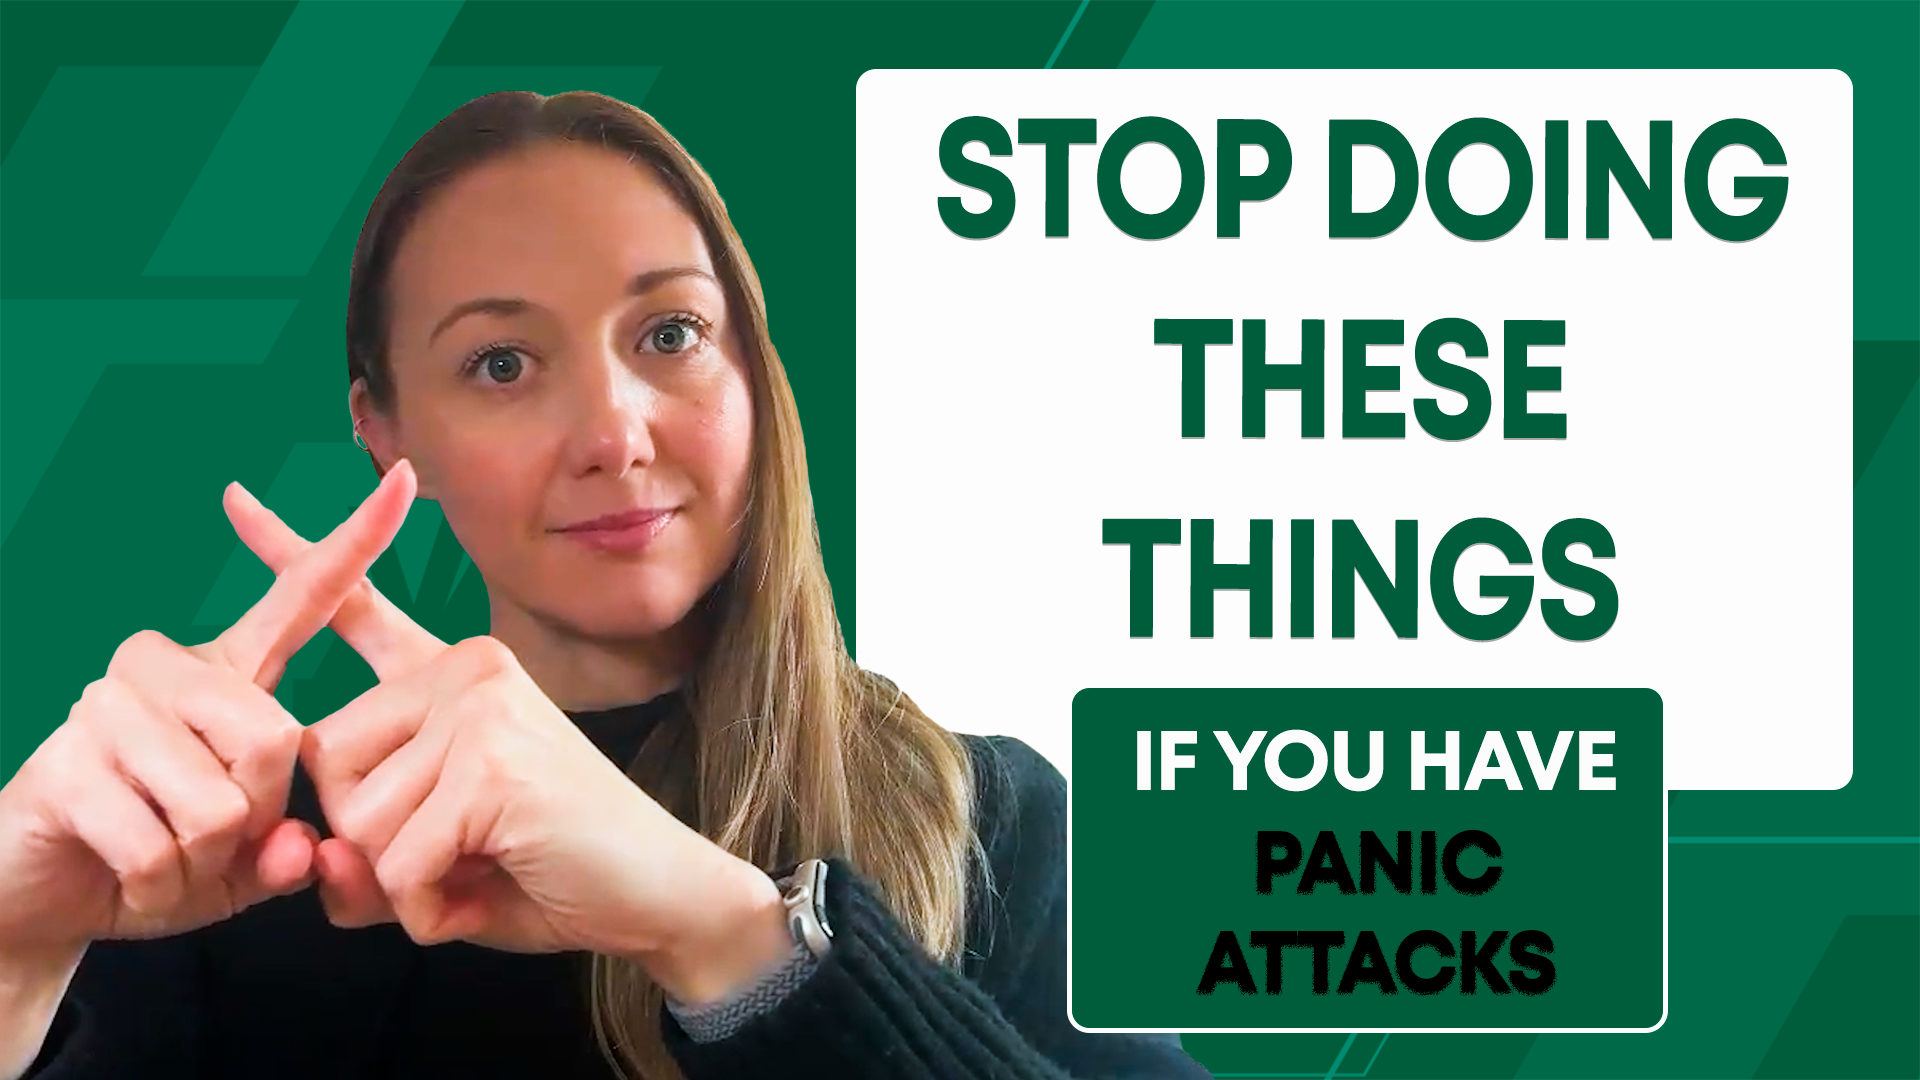 Stop doing these things if you have panic attacks